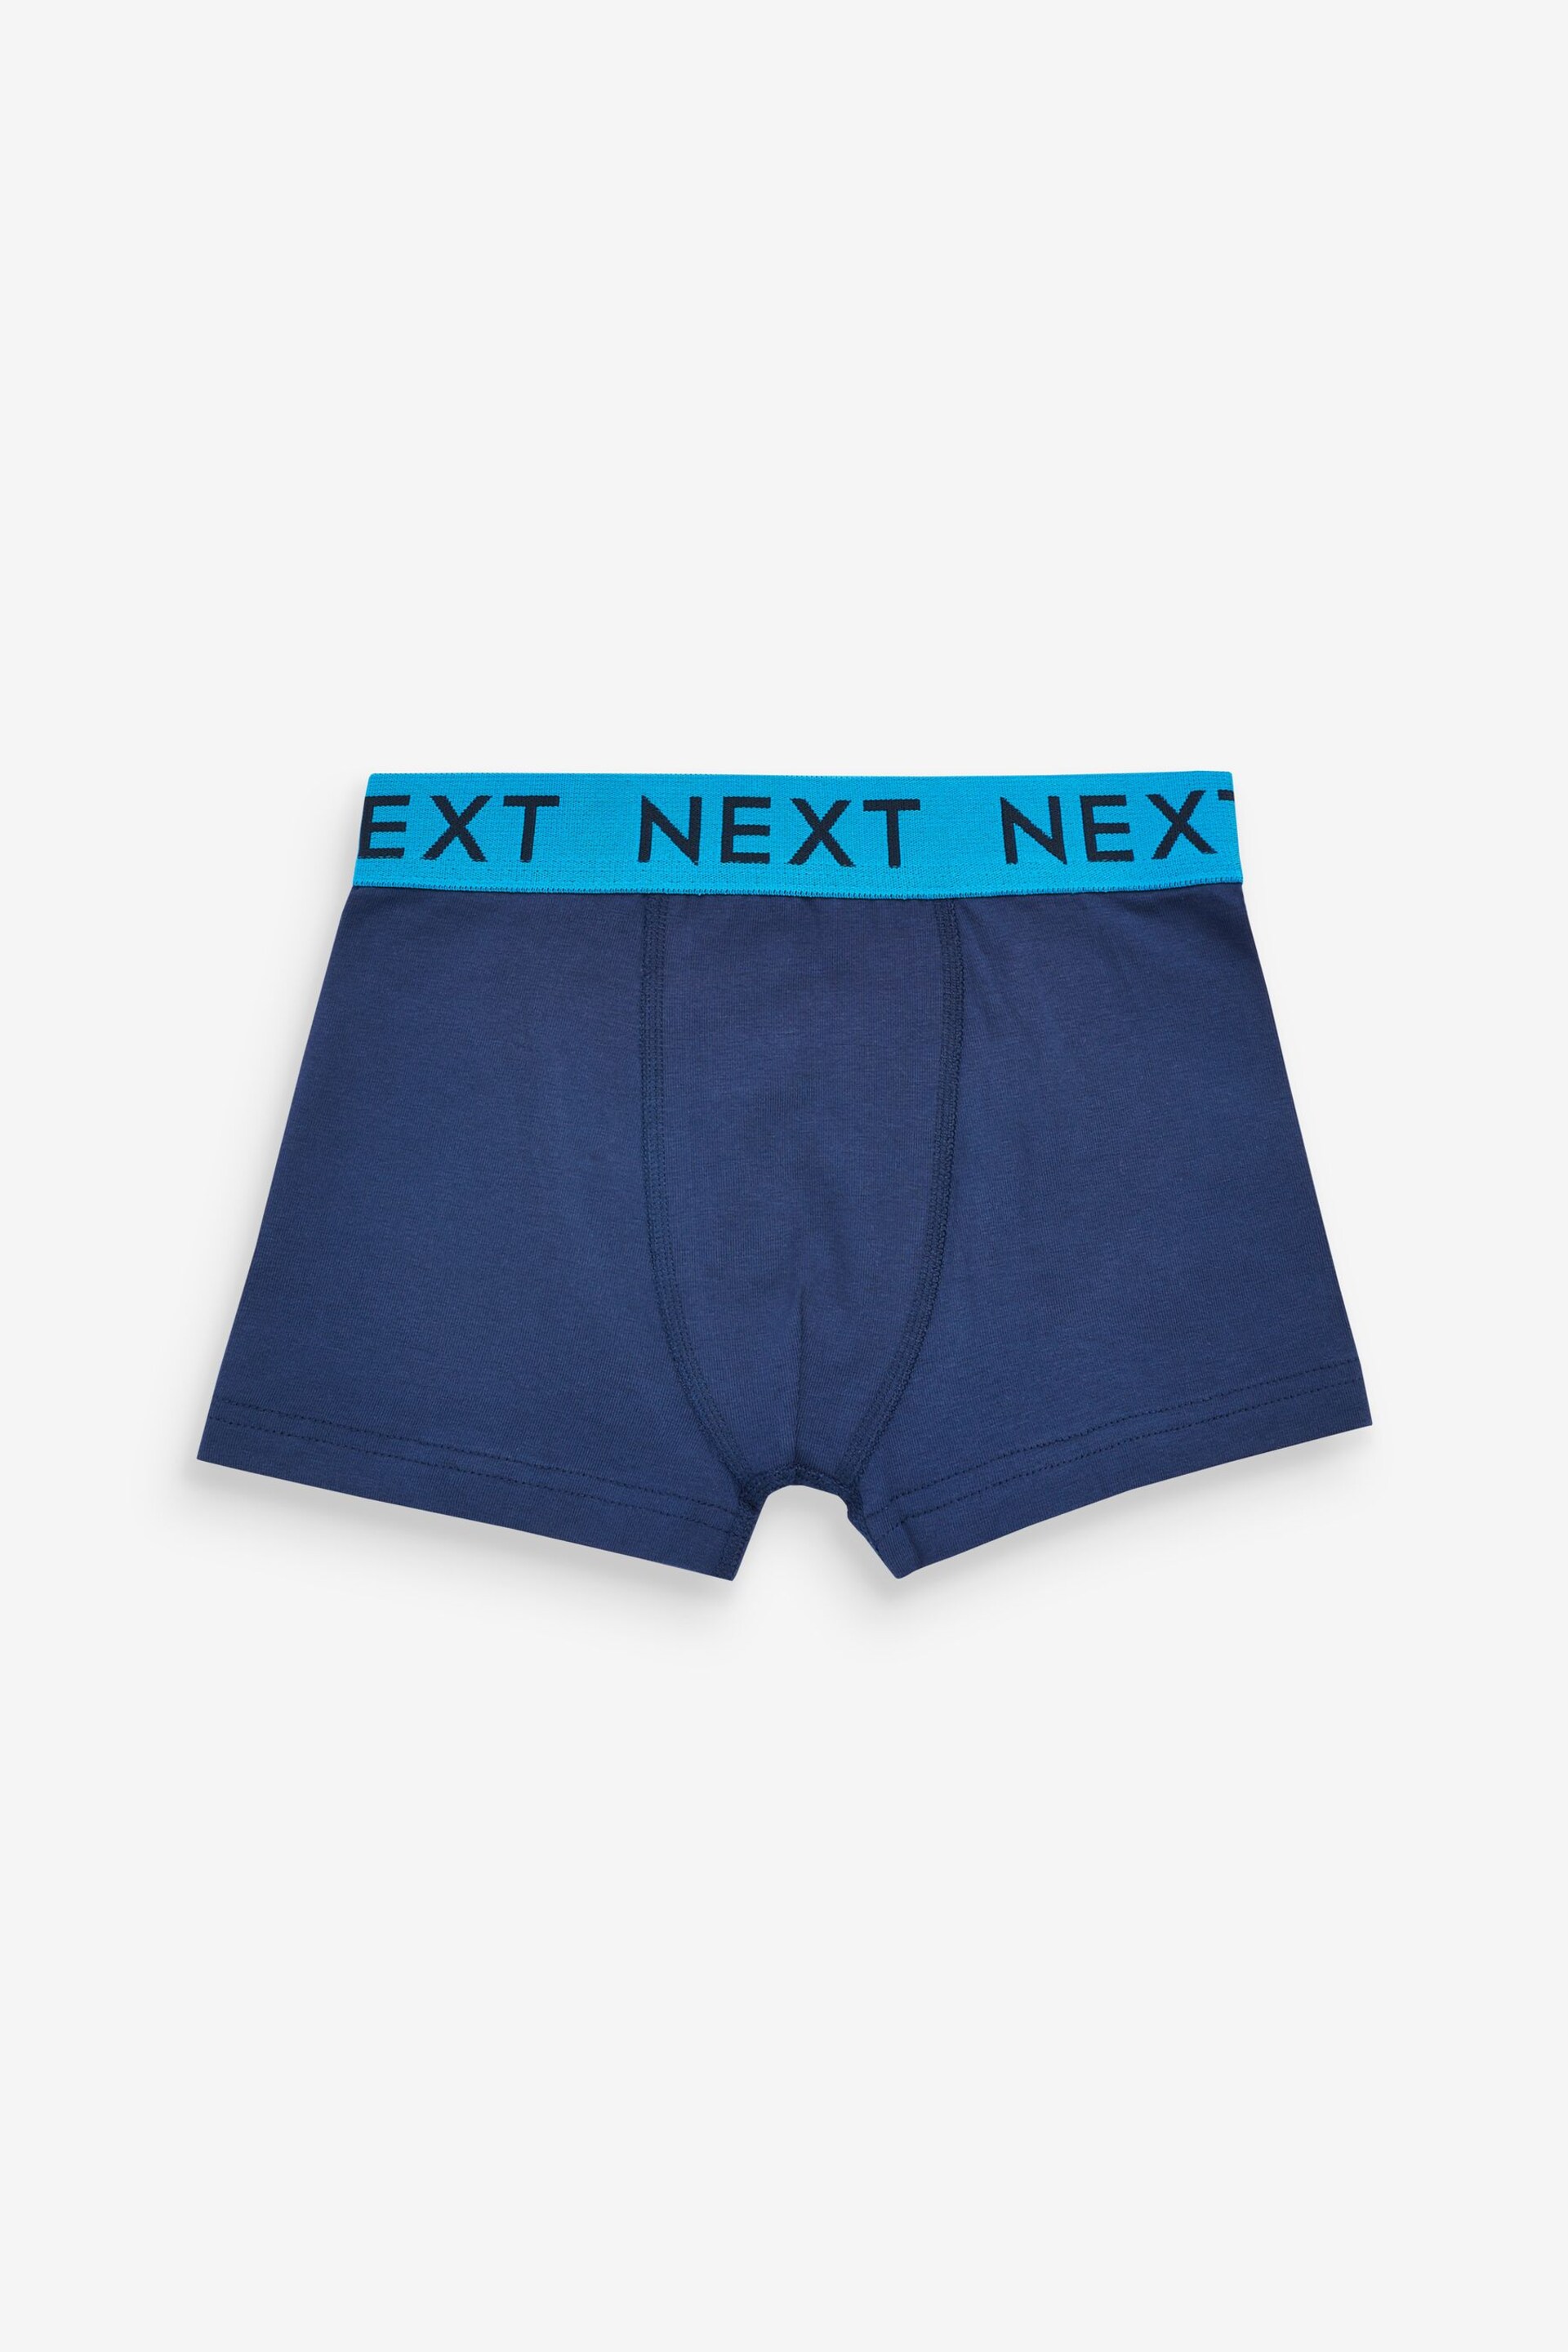 Navy Bright Waistband Trunks 10 Pack (1.5-16yrs) - Image 11 of 11